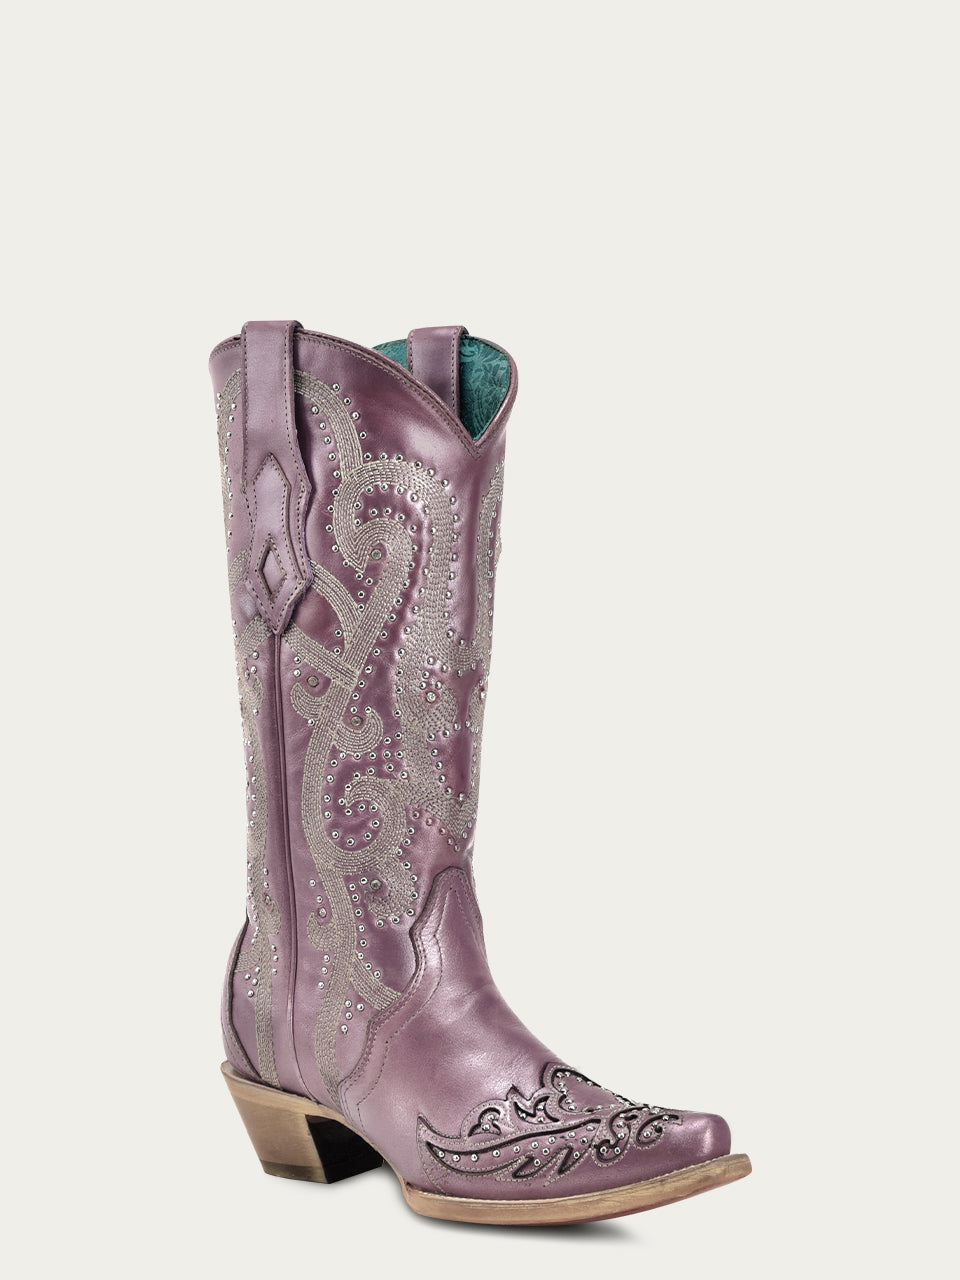 A4512 - WOMEN'S EMBROIDERY WITH CRYSTALS AND STUDS METALIC LILA SNIP TOE STUDDED WING TIP COWBOY BOOT